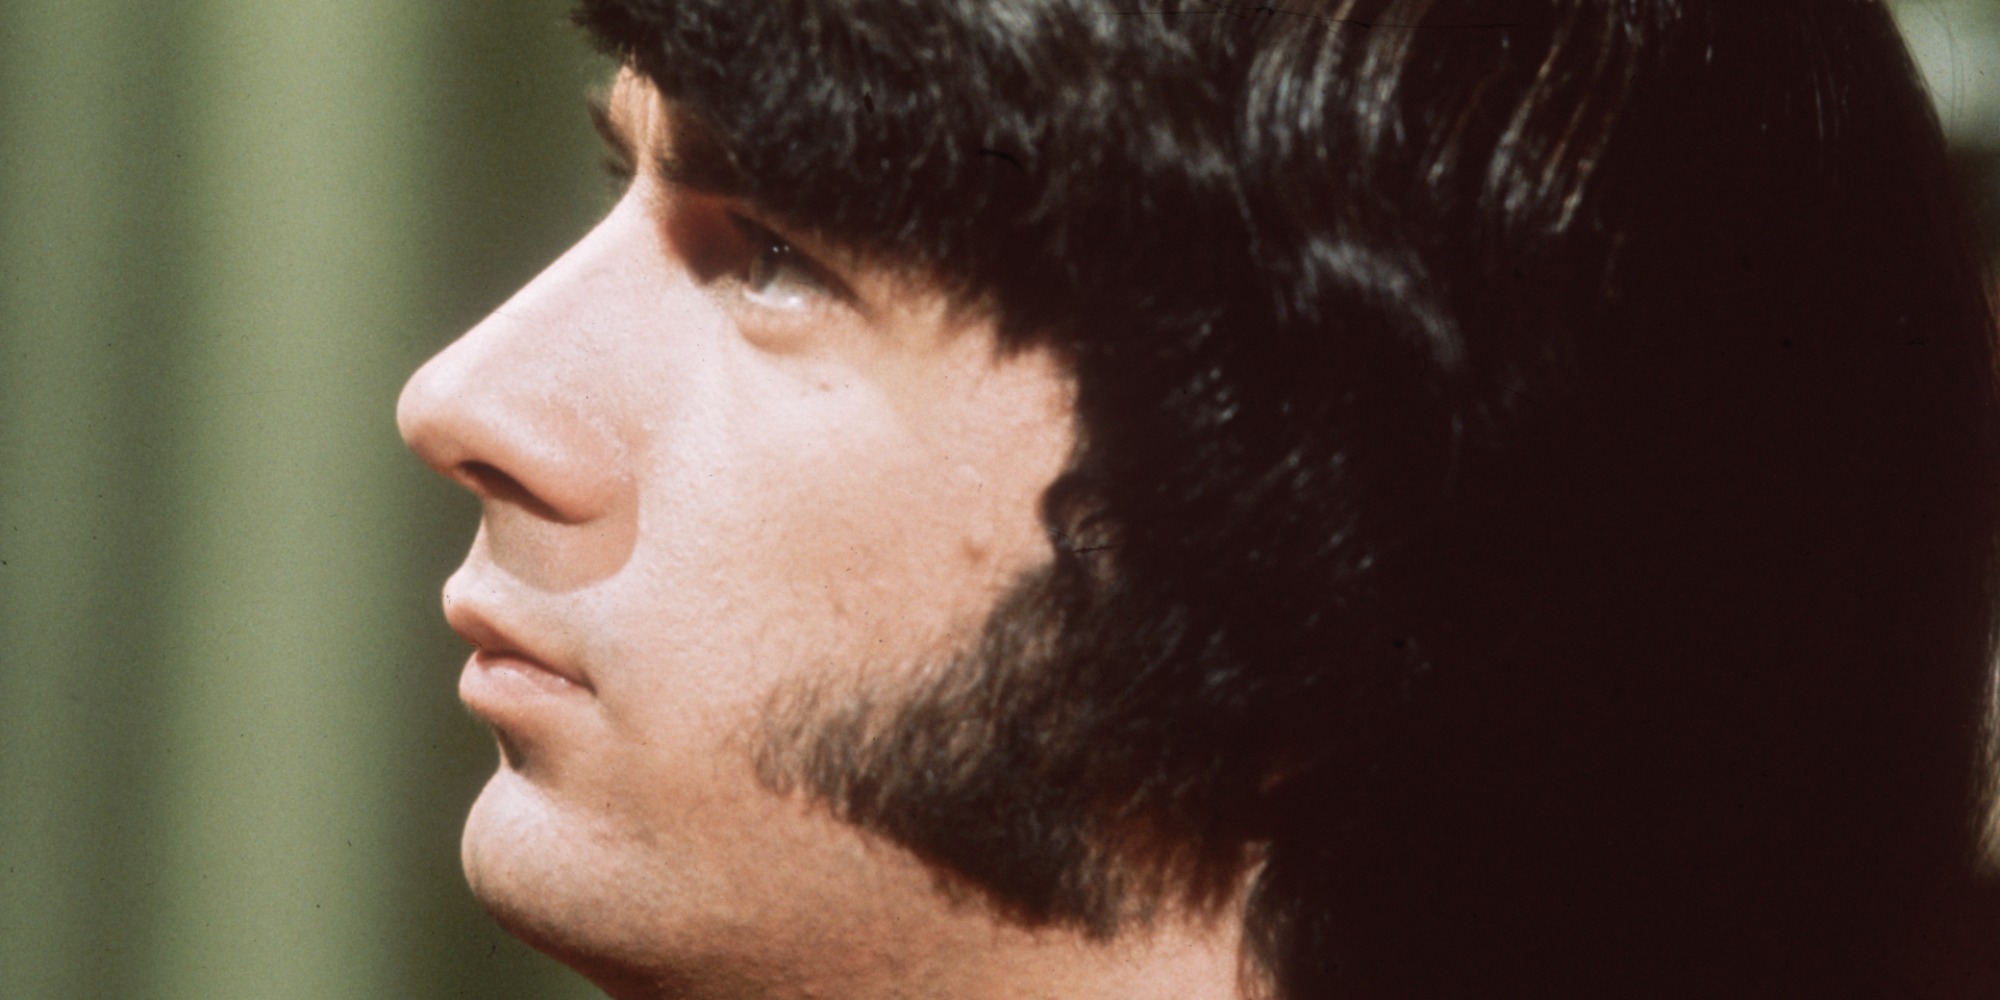 mike nesmith looks away from the camera